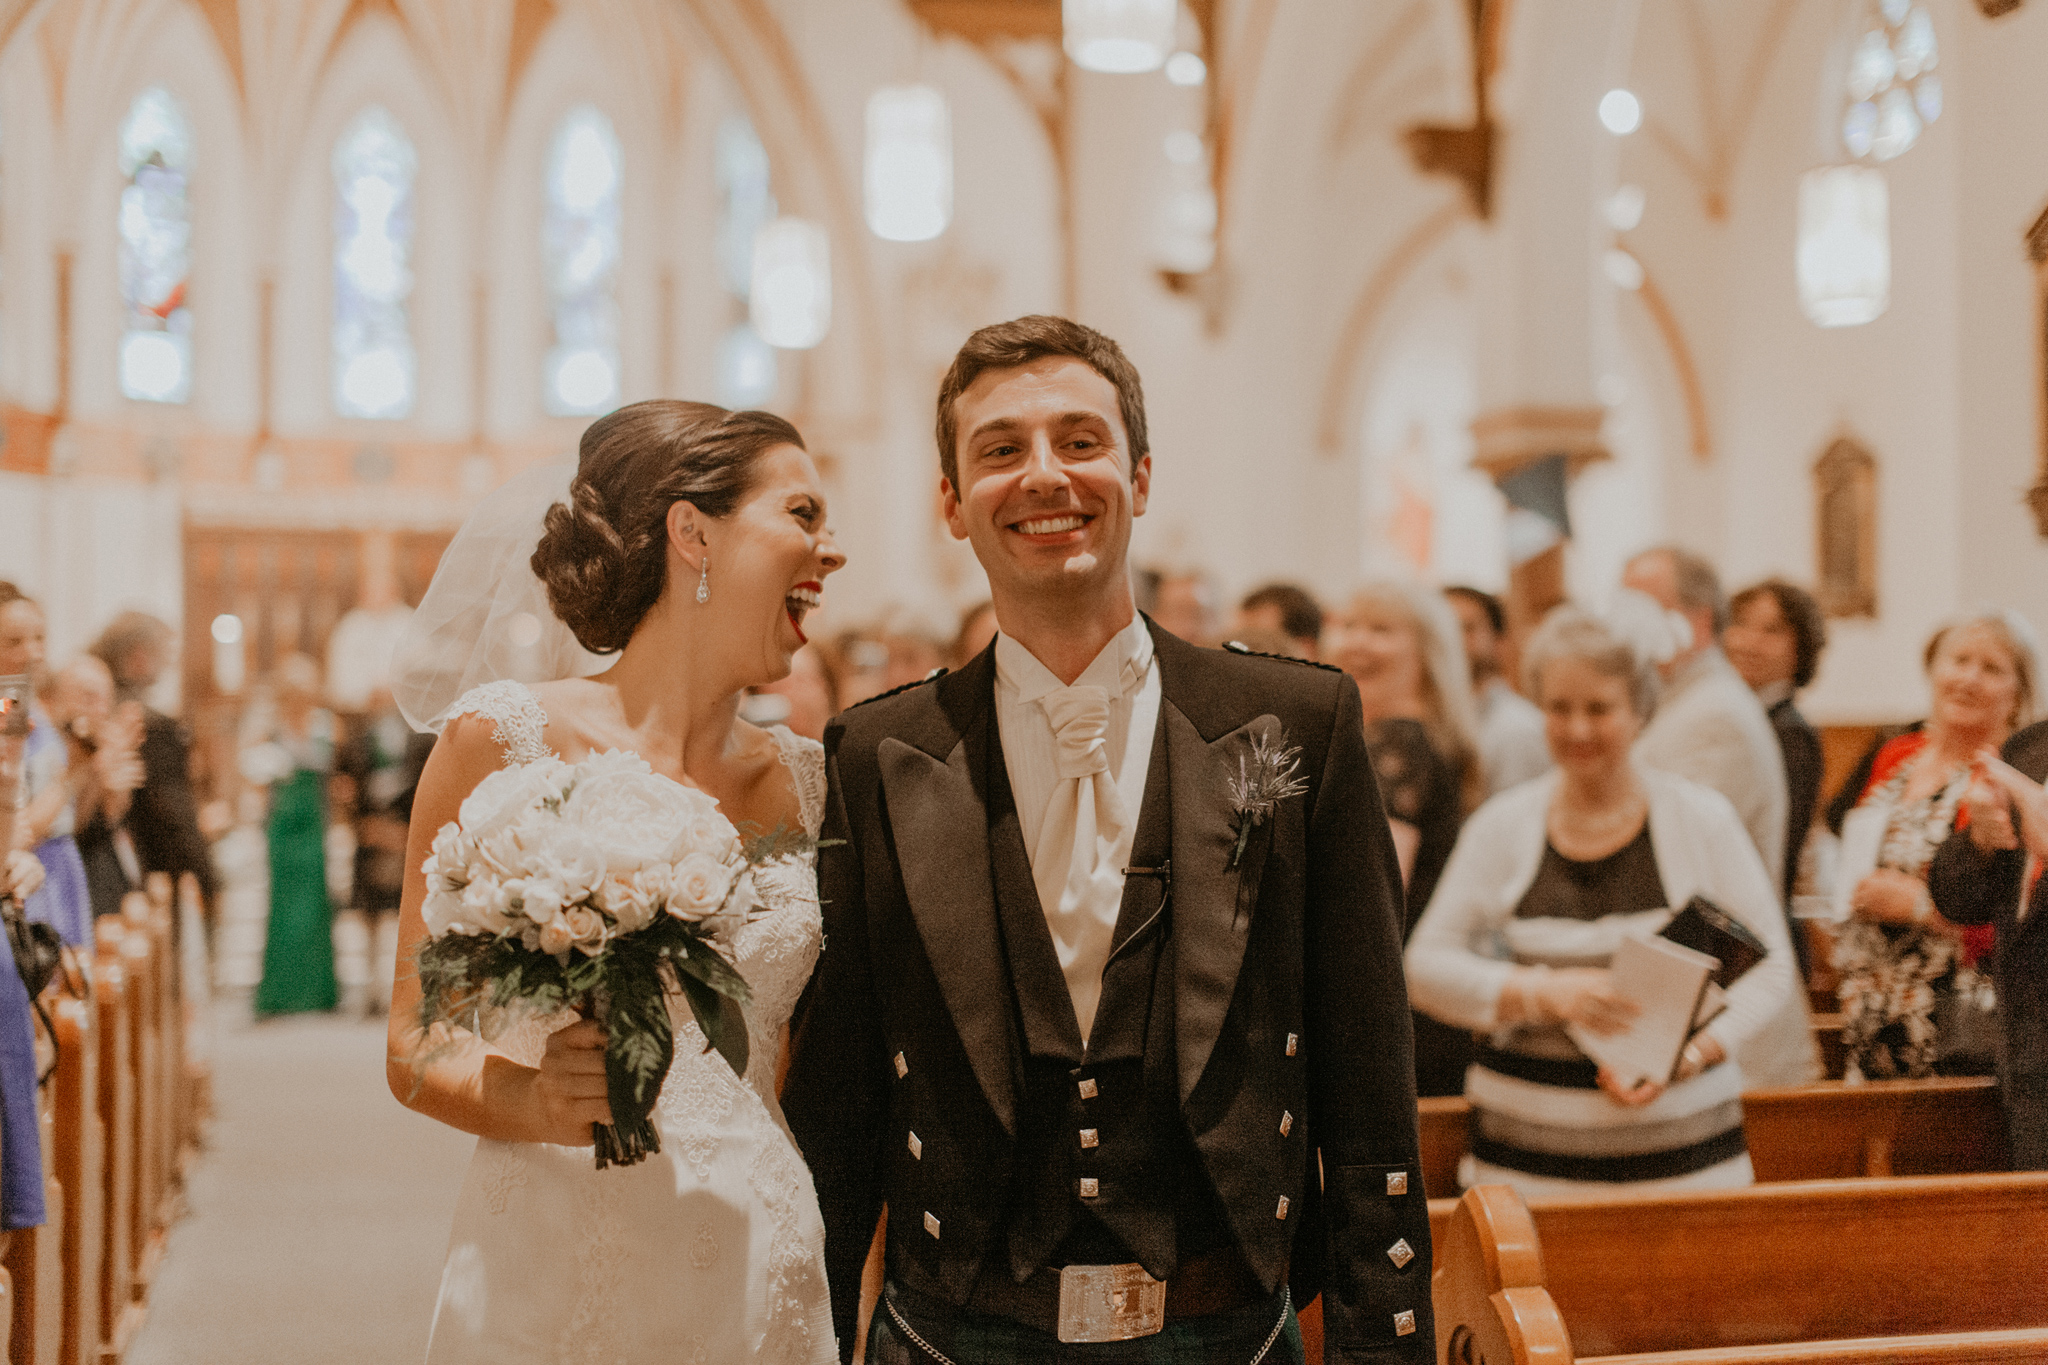 Bride and groom recessional in Scottish church wedding